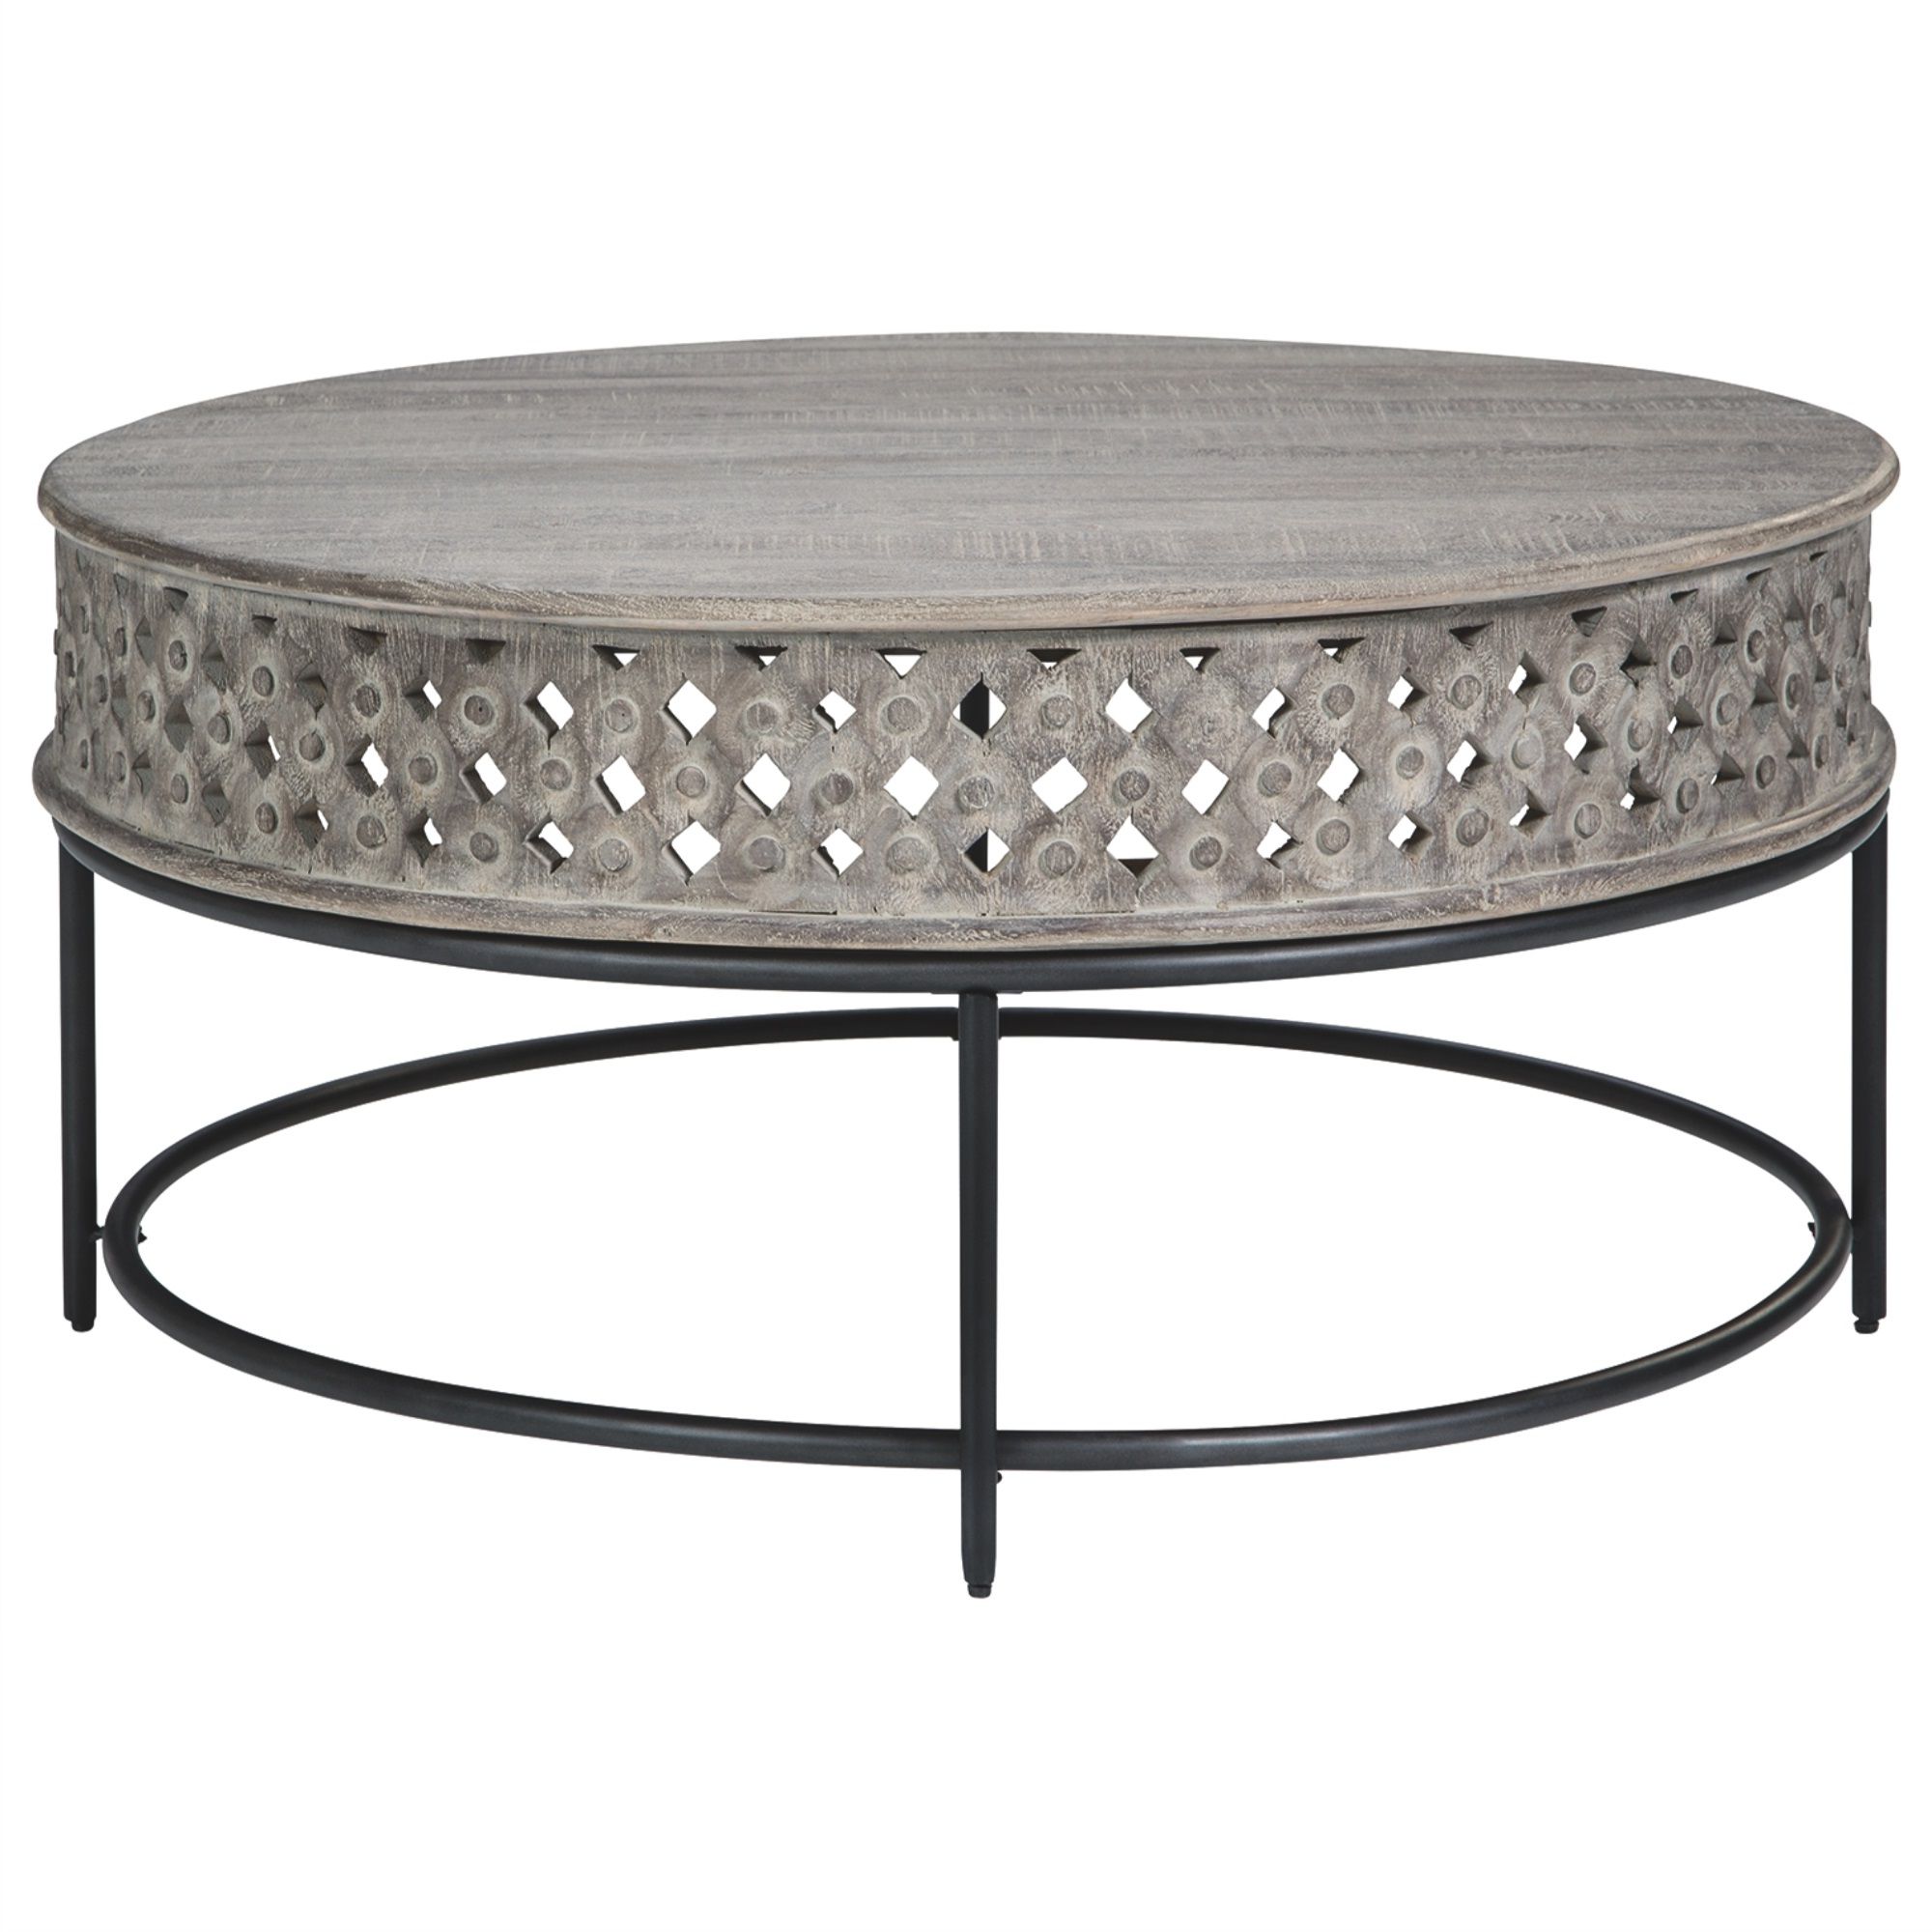 Fashionable Gray Wood Veneer Cocktail Tables Throughout Wooden Round Cocktail Table With Hand Carved Lattice (View 16 of 20)